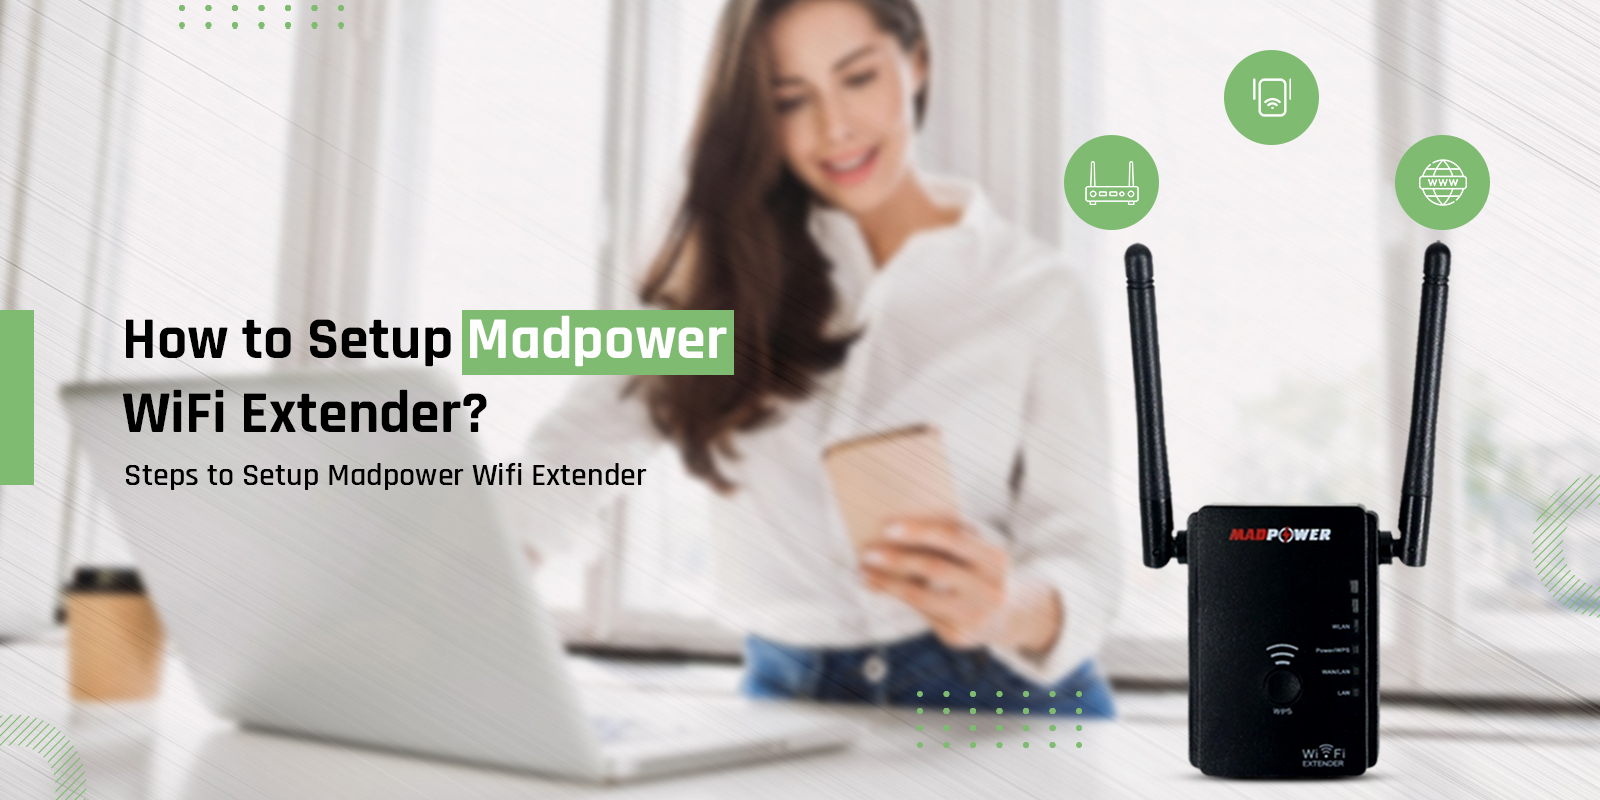 How-to-Setup-Madpower-WiFi-Extender